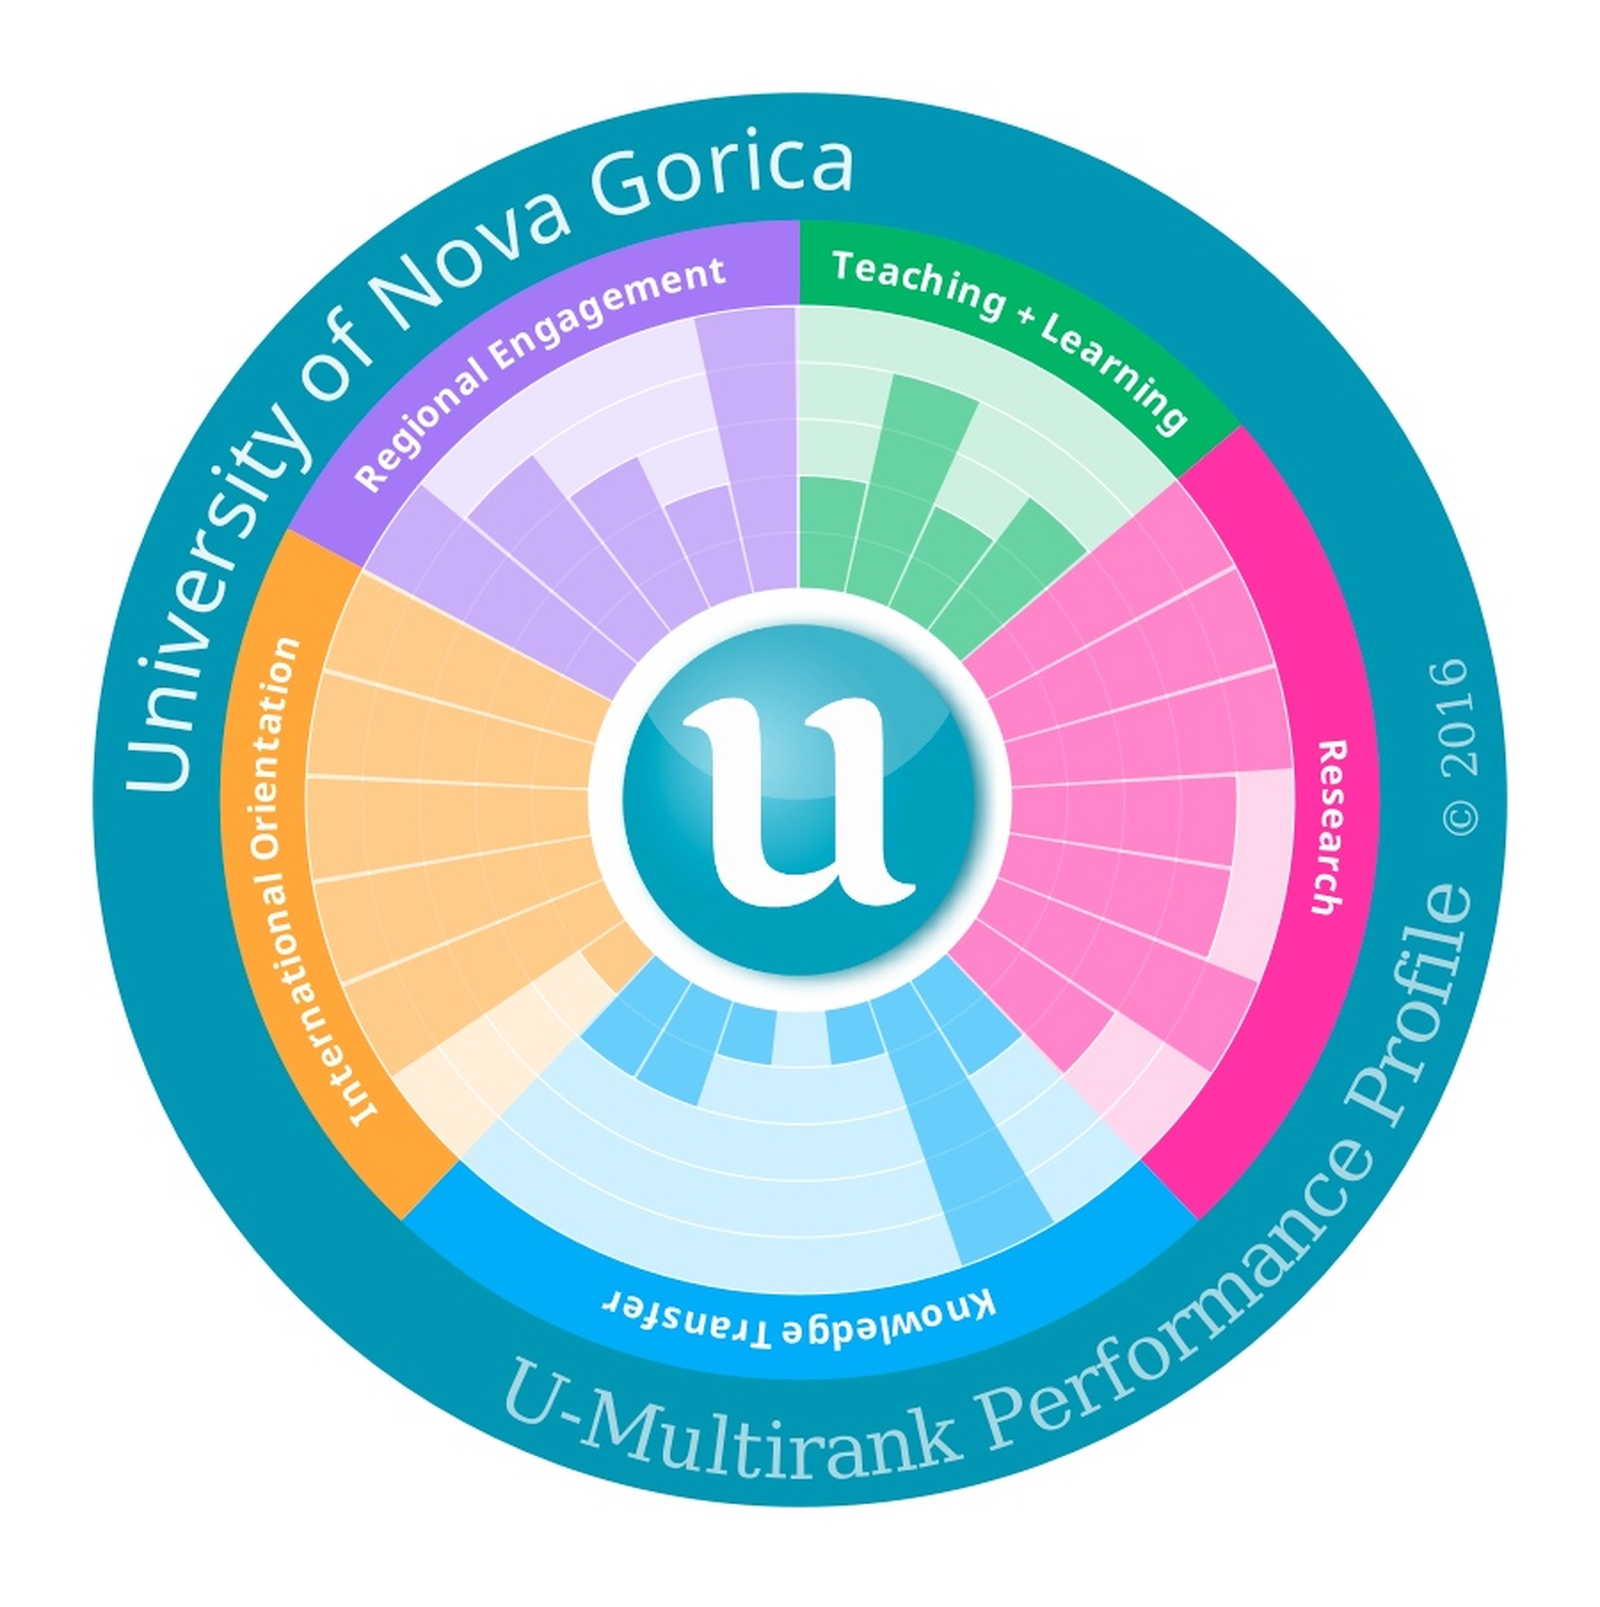 The graphic illustration of UNG’s profile on the U-Multirank 2016 global ranking chart. The height of each column within a specific circular sector denotes a grade achieved for a specific criterion (the tallest column stands for 1 – exceptionally good, and the lowest column stands for 5 –weak).